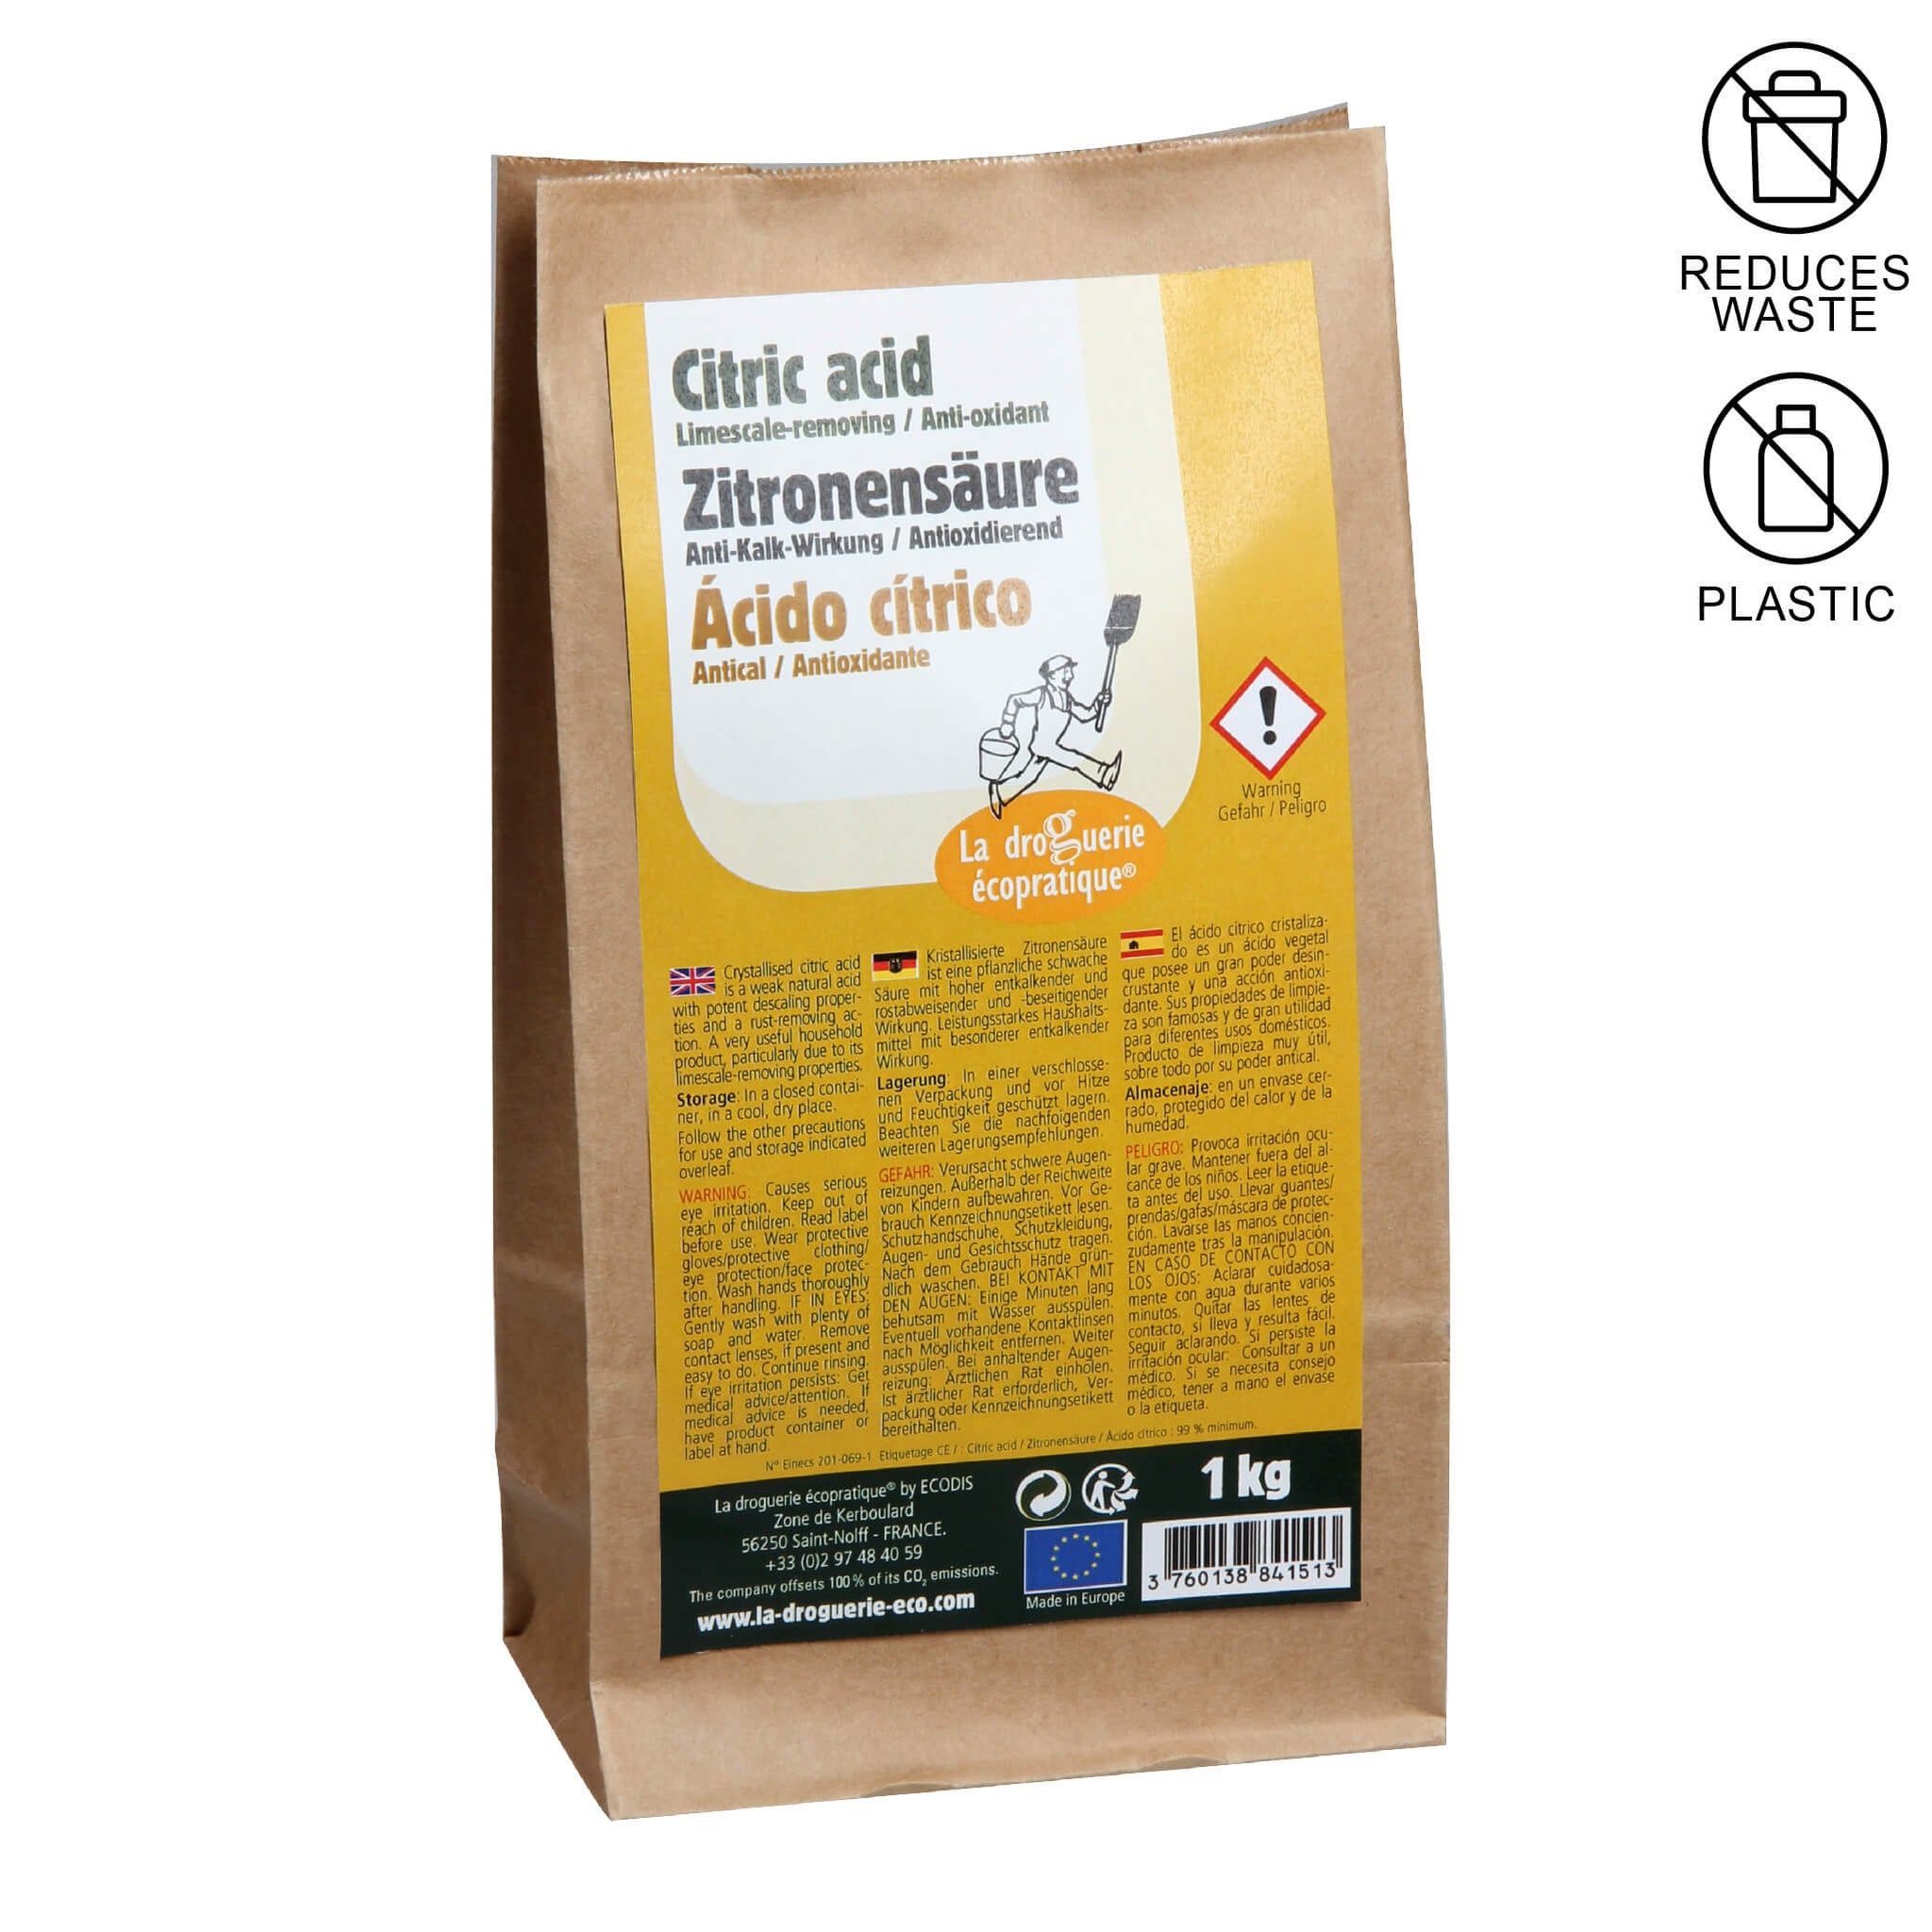 kraft paper packaging with citric acid